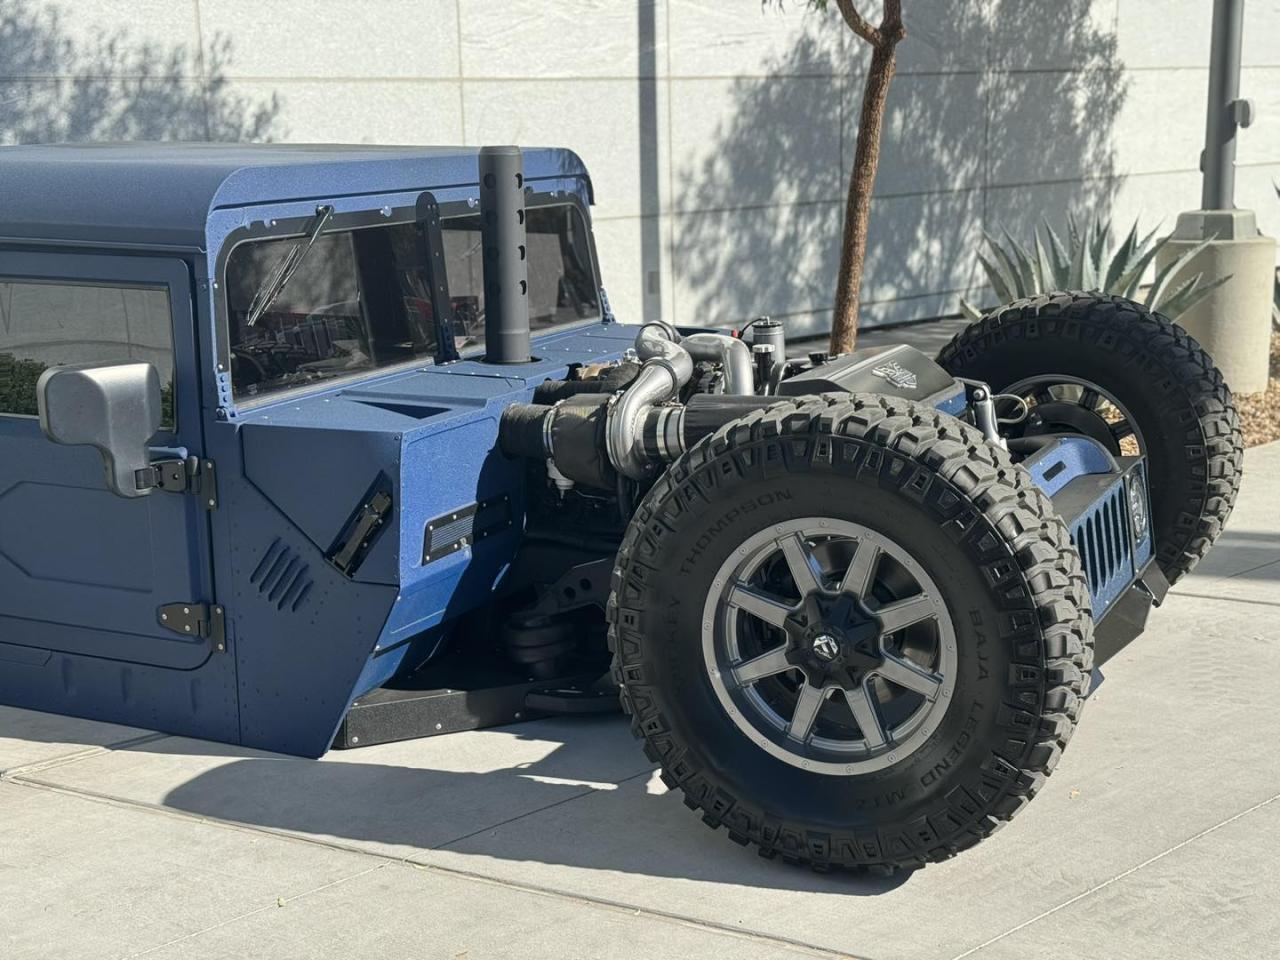 lamtac up close with the beast hummer h fitted with f engine and wide body transforming into a handsome monster at the sema show 655c8db6d6403 Up Close With The Beast: Hummer H1 Fitted With F1 Engine And Wide Body, Transforming Into A Handsome Monster At The SEMA Show